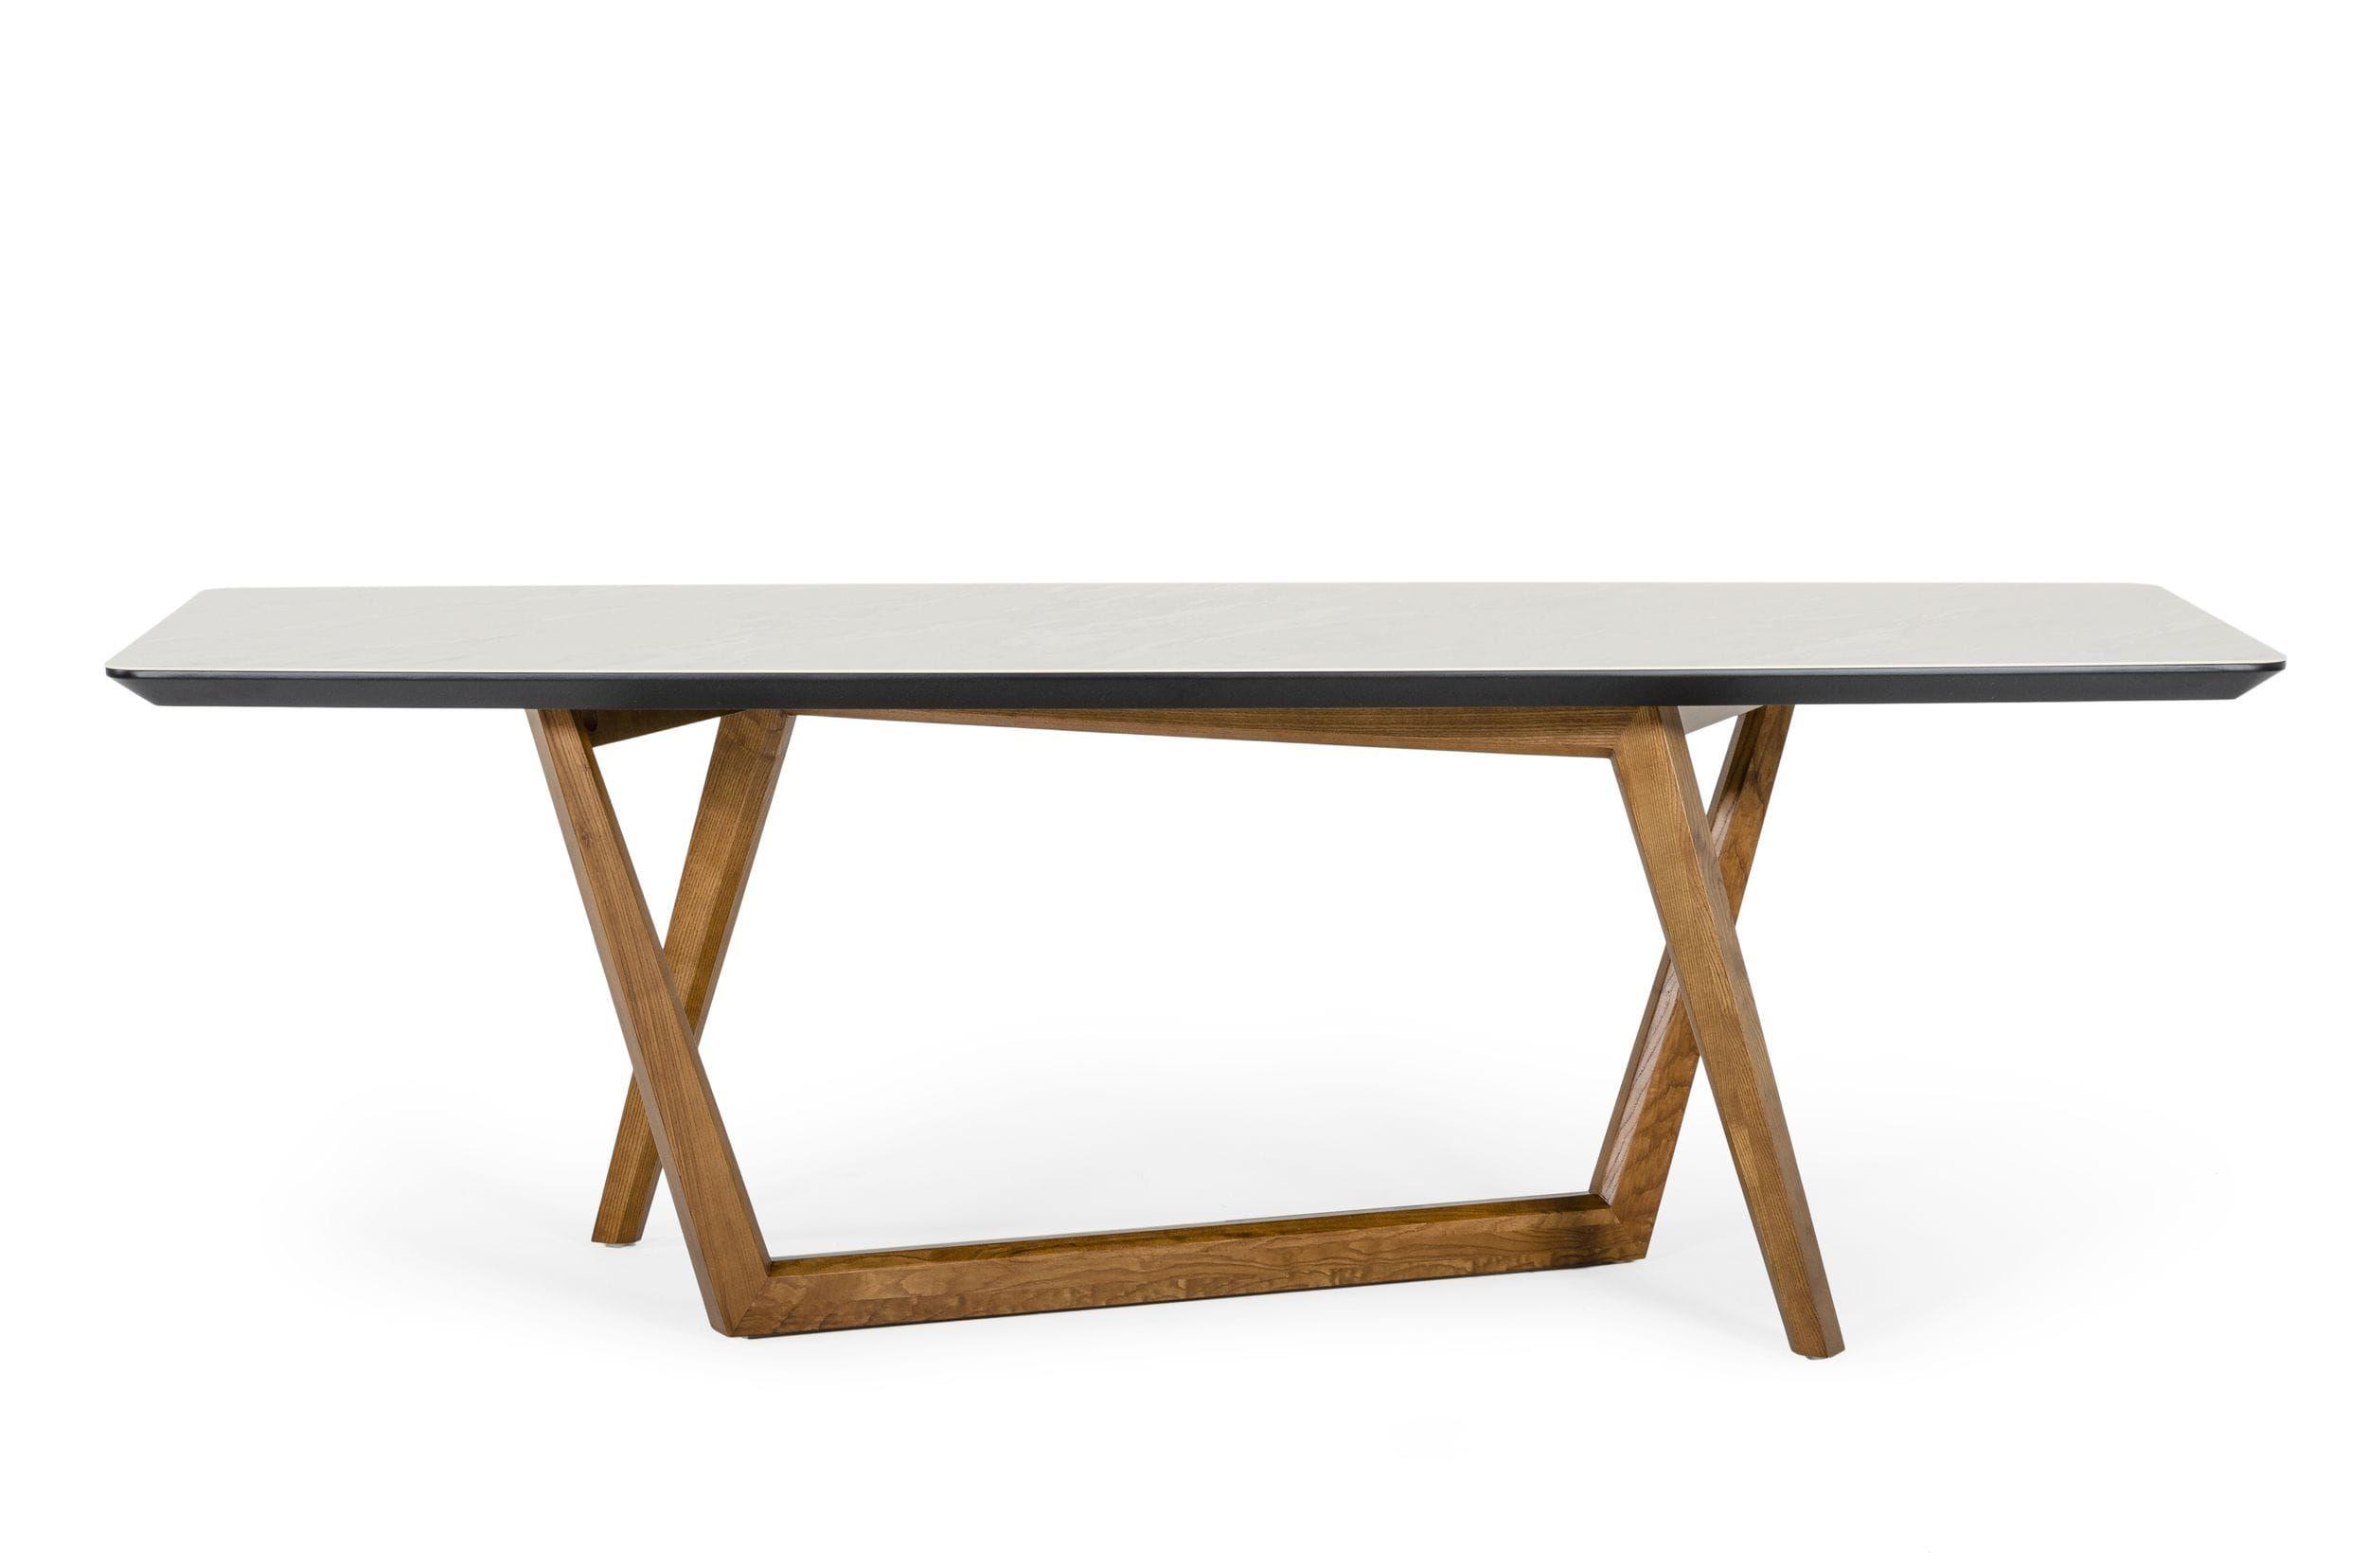 Contemporary, Modern Dining Table James VGCSDT-19078-WAL-DT in Walnut, Gray 